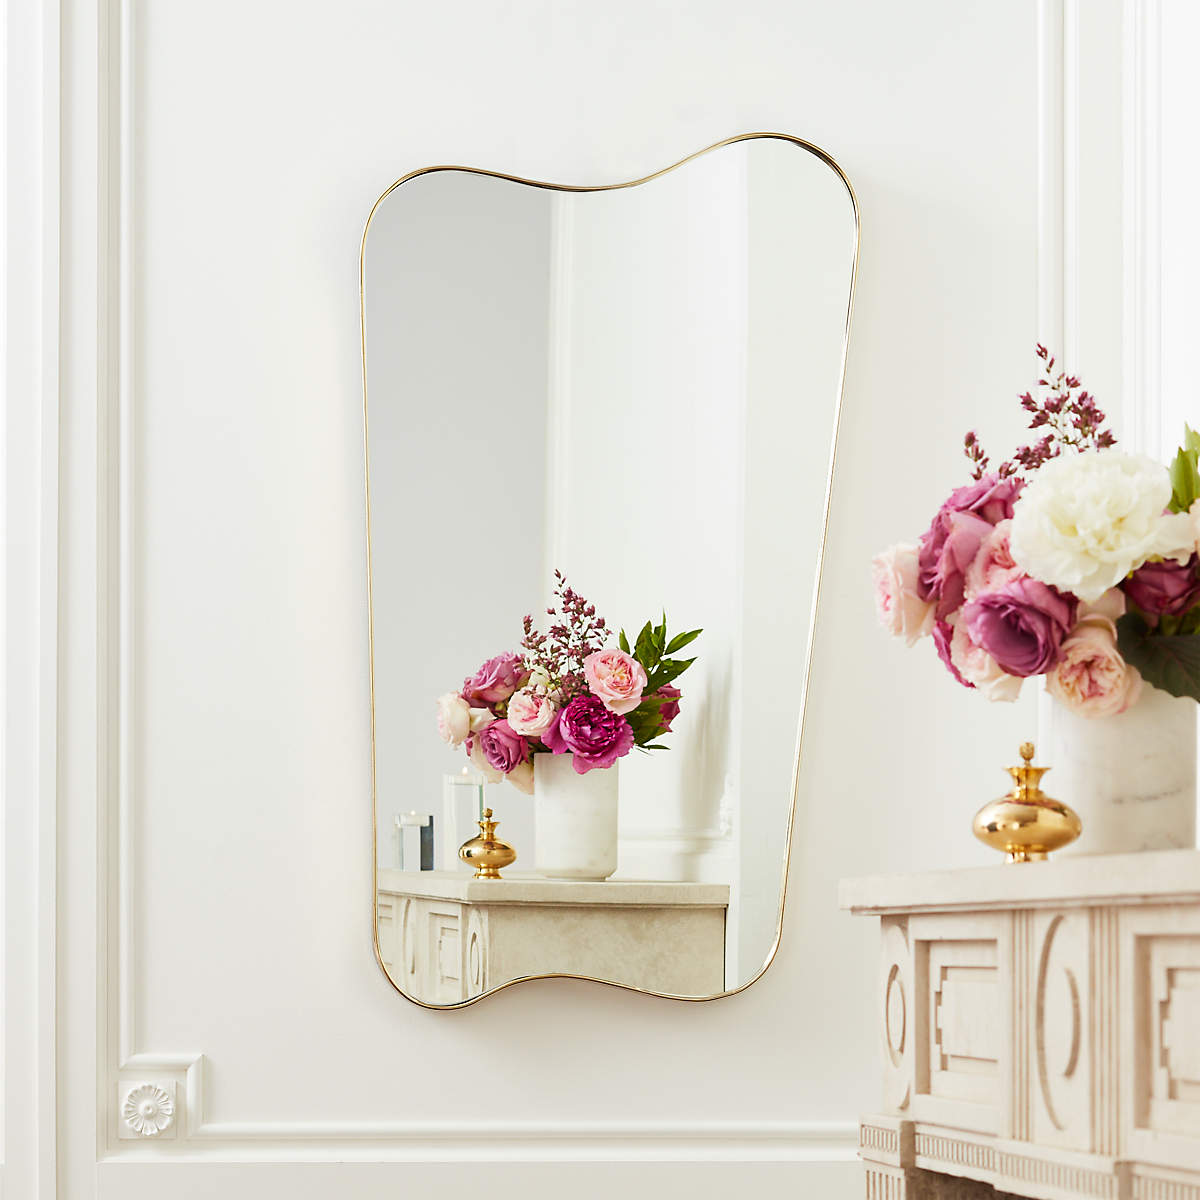 Try an Arched Mirror